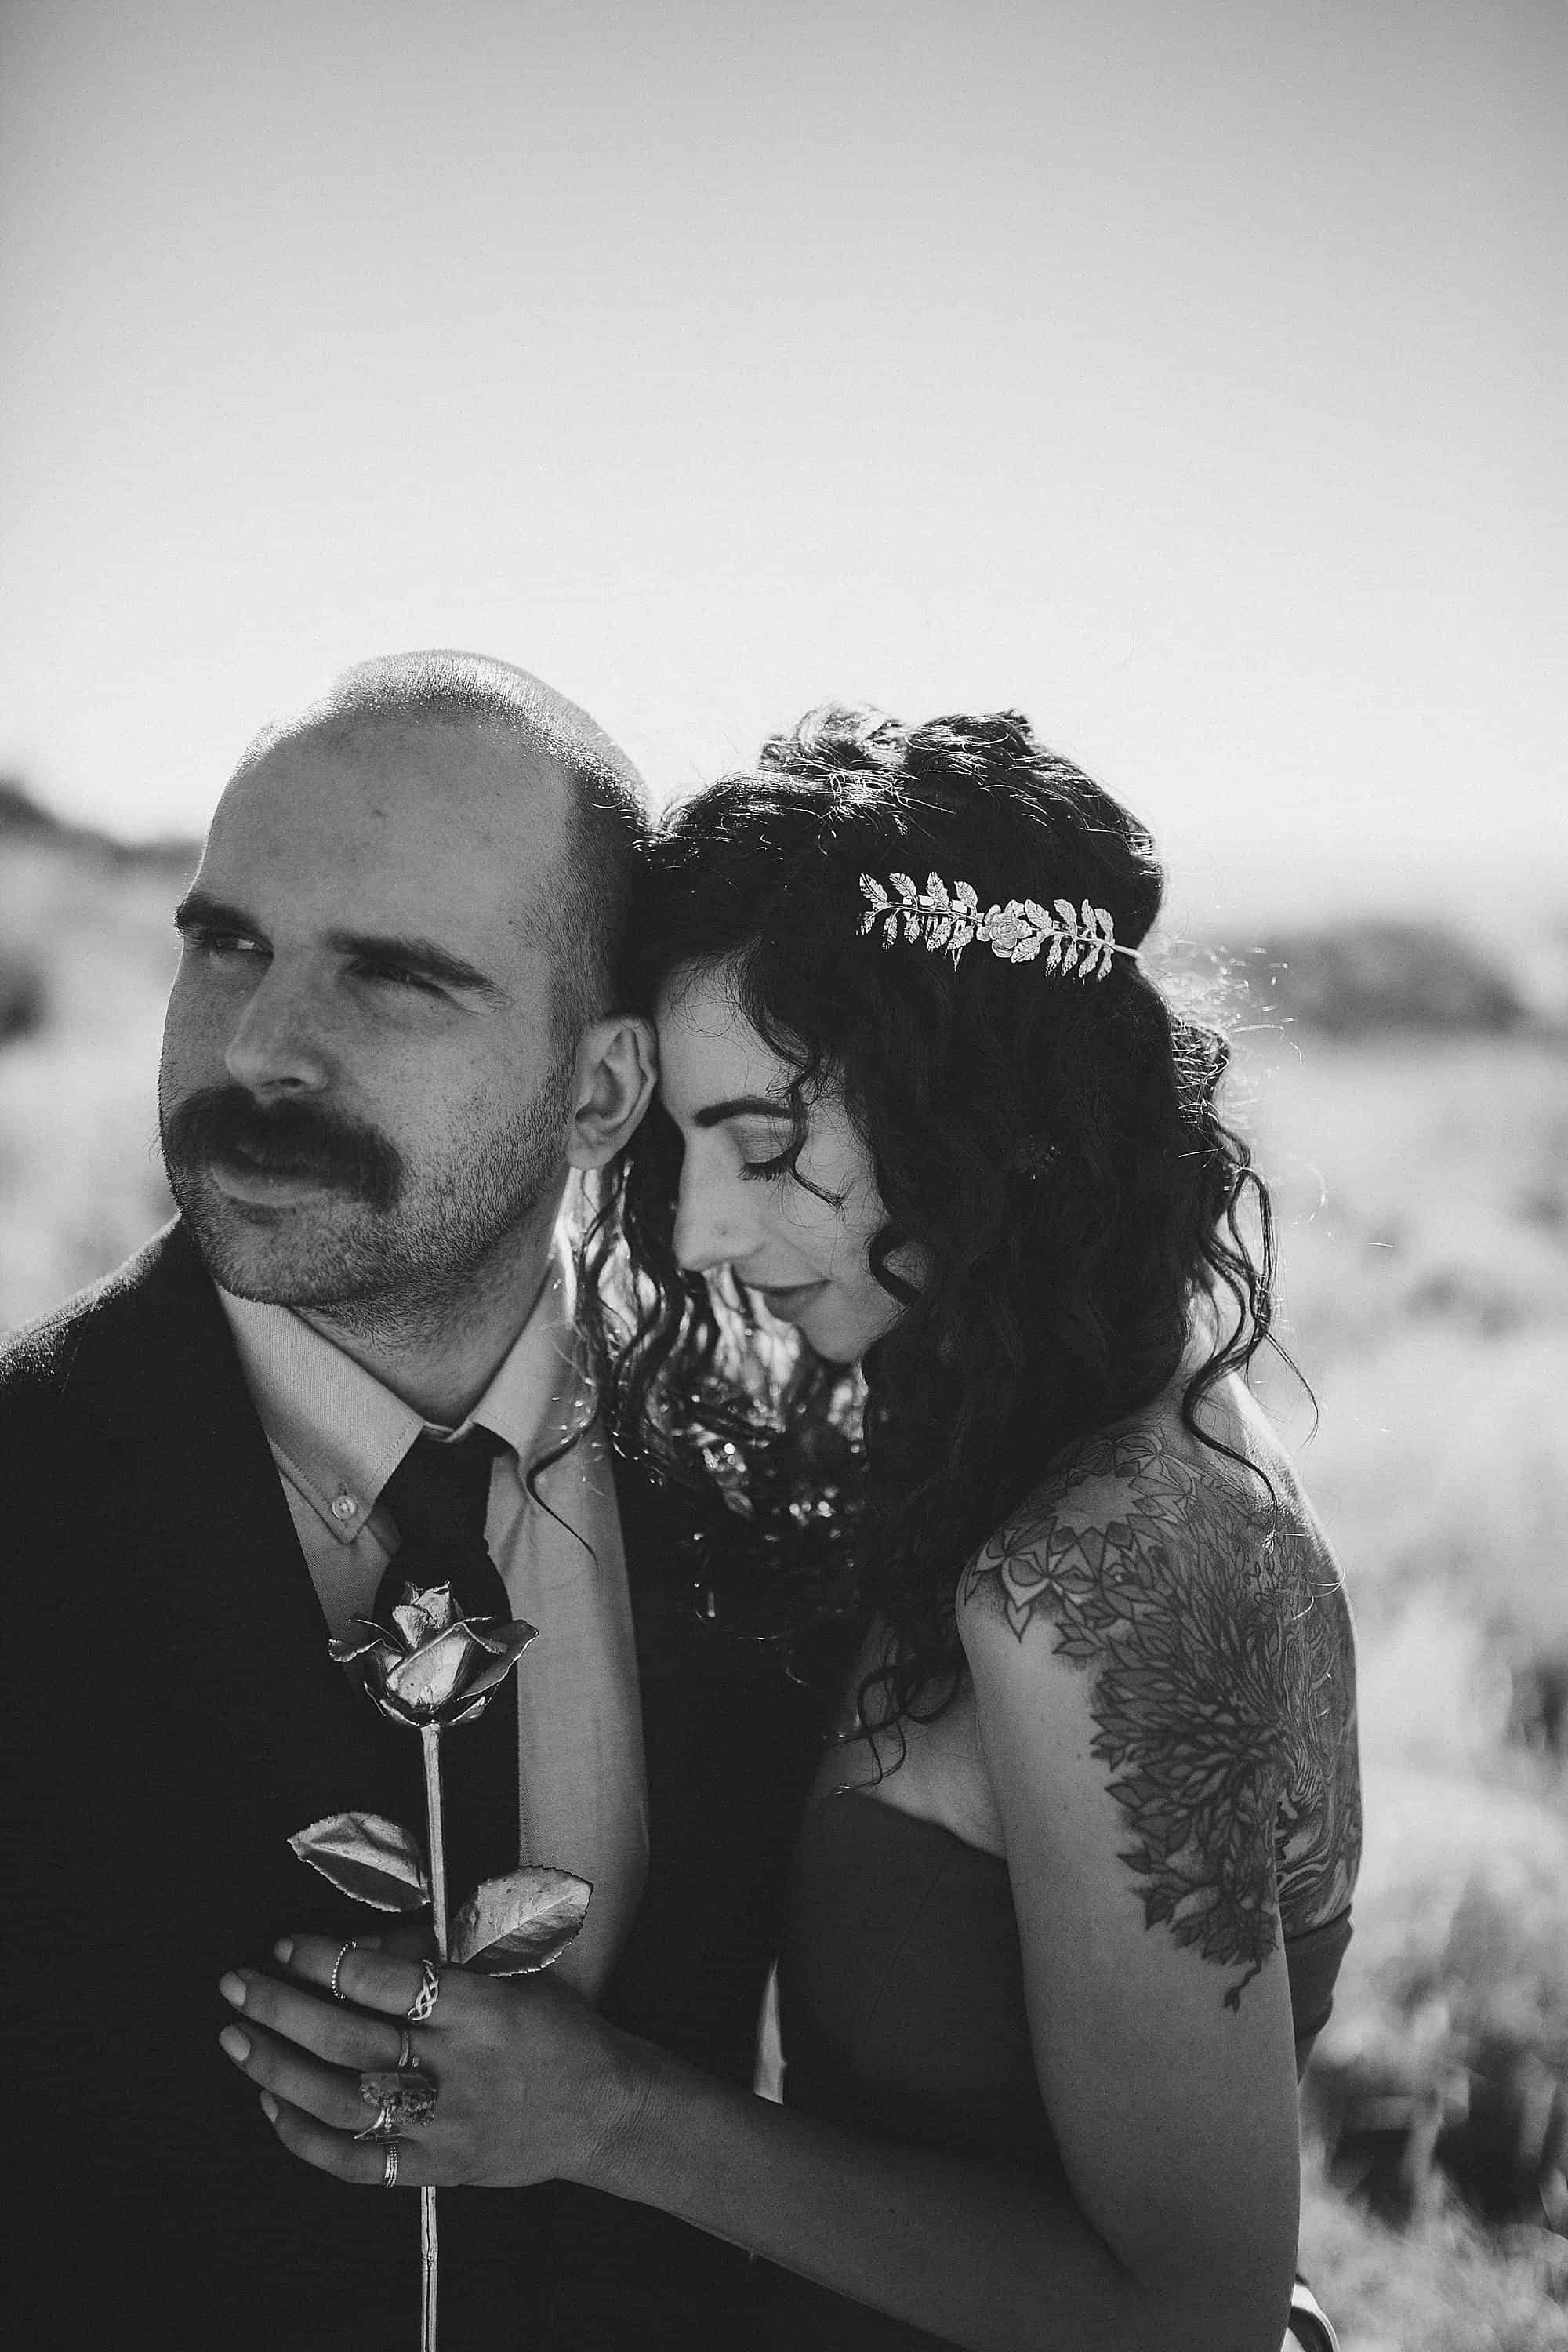 New Mexico Wedding Photography - The Light + Color